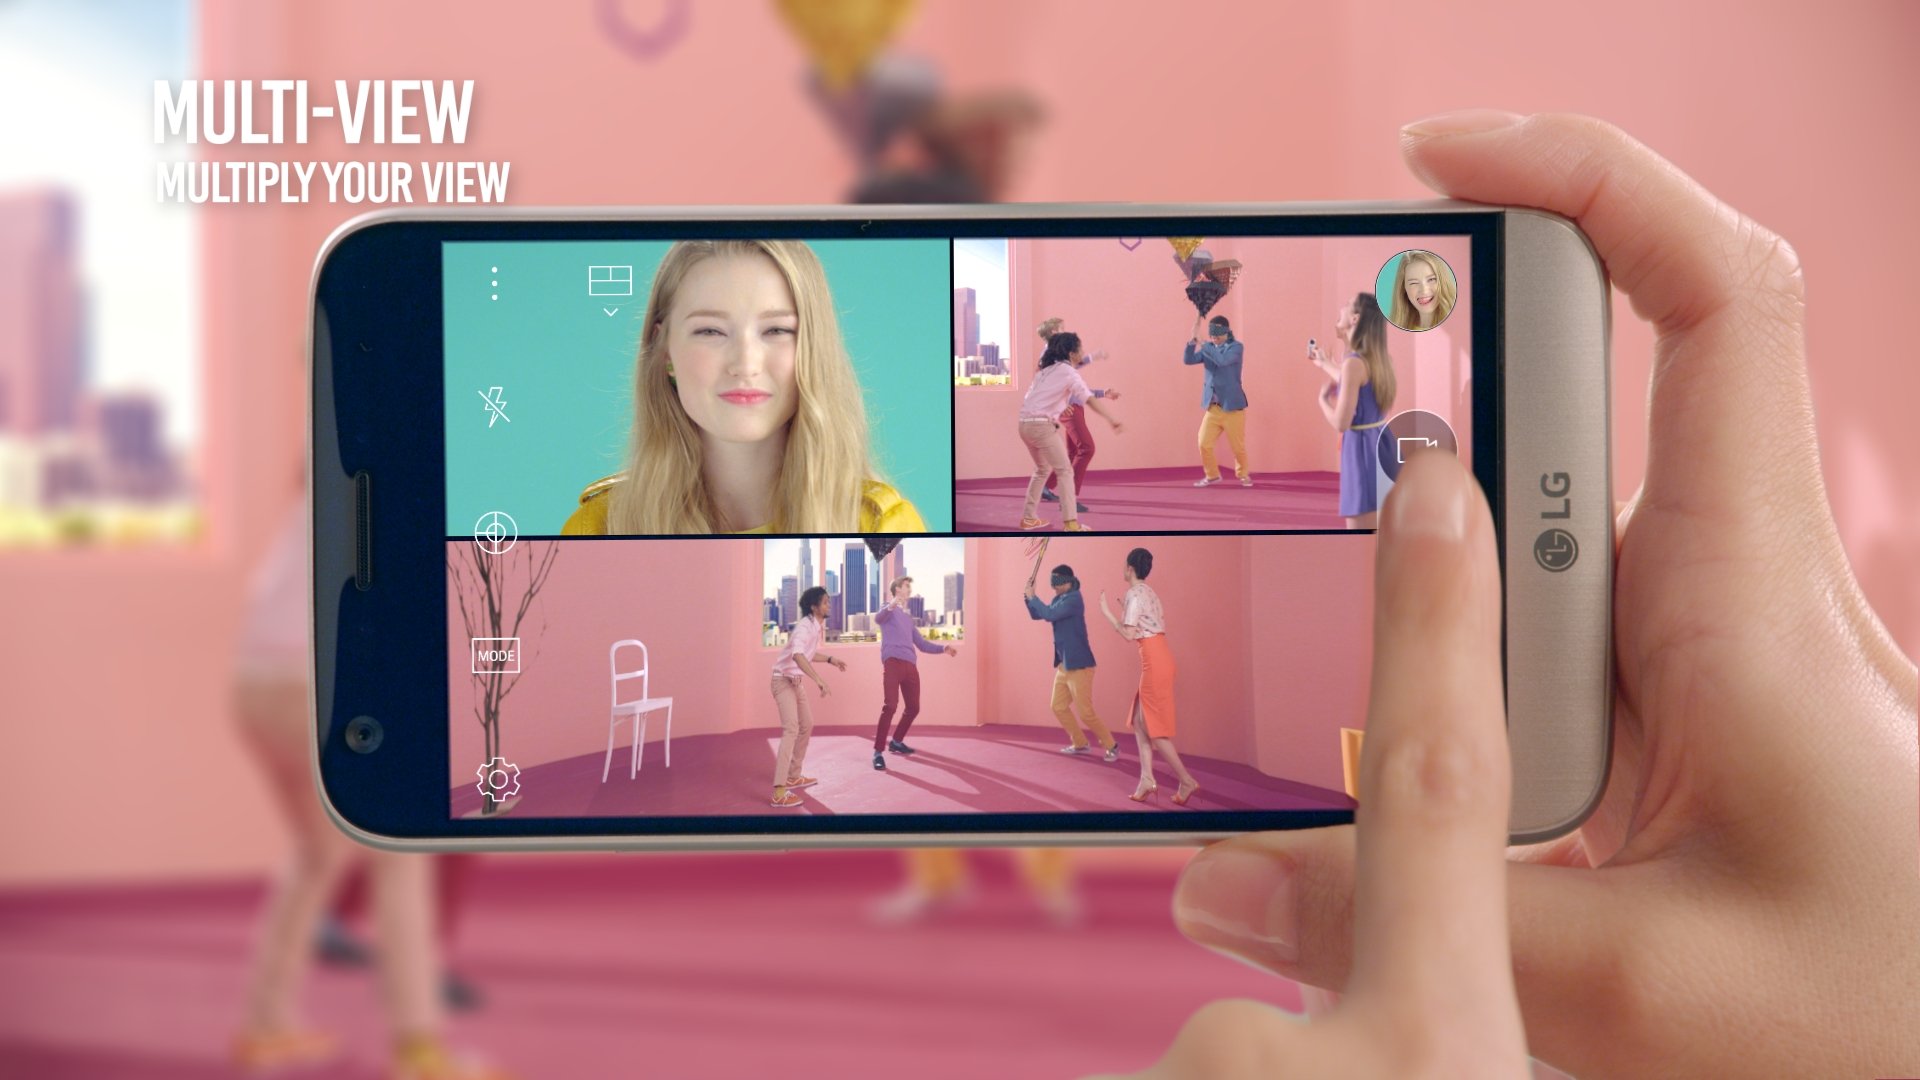 LG Introduces More Playful and Innovative User Interface ‘UX 5.0’ for G5 Smartphone